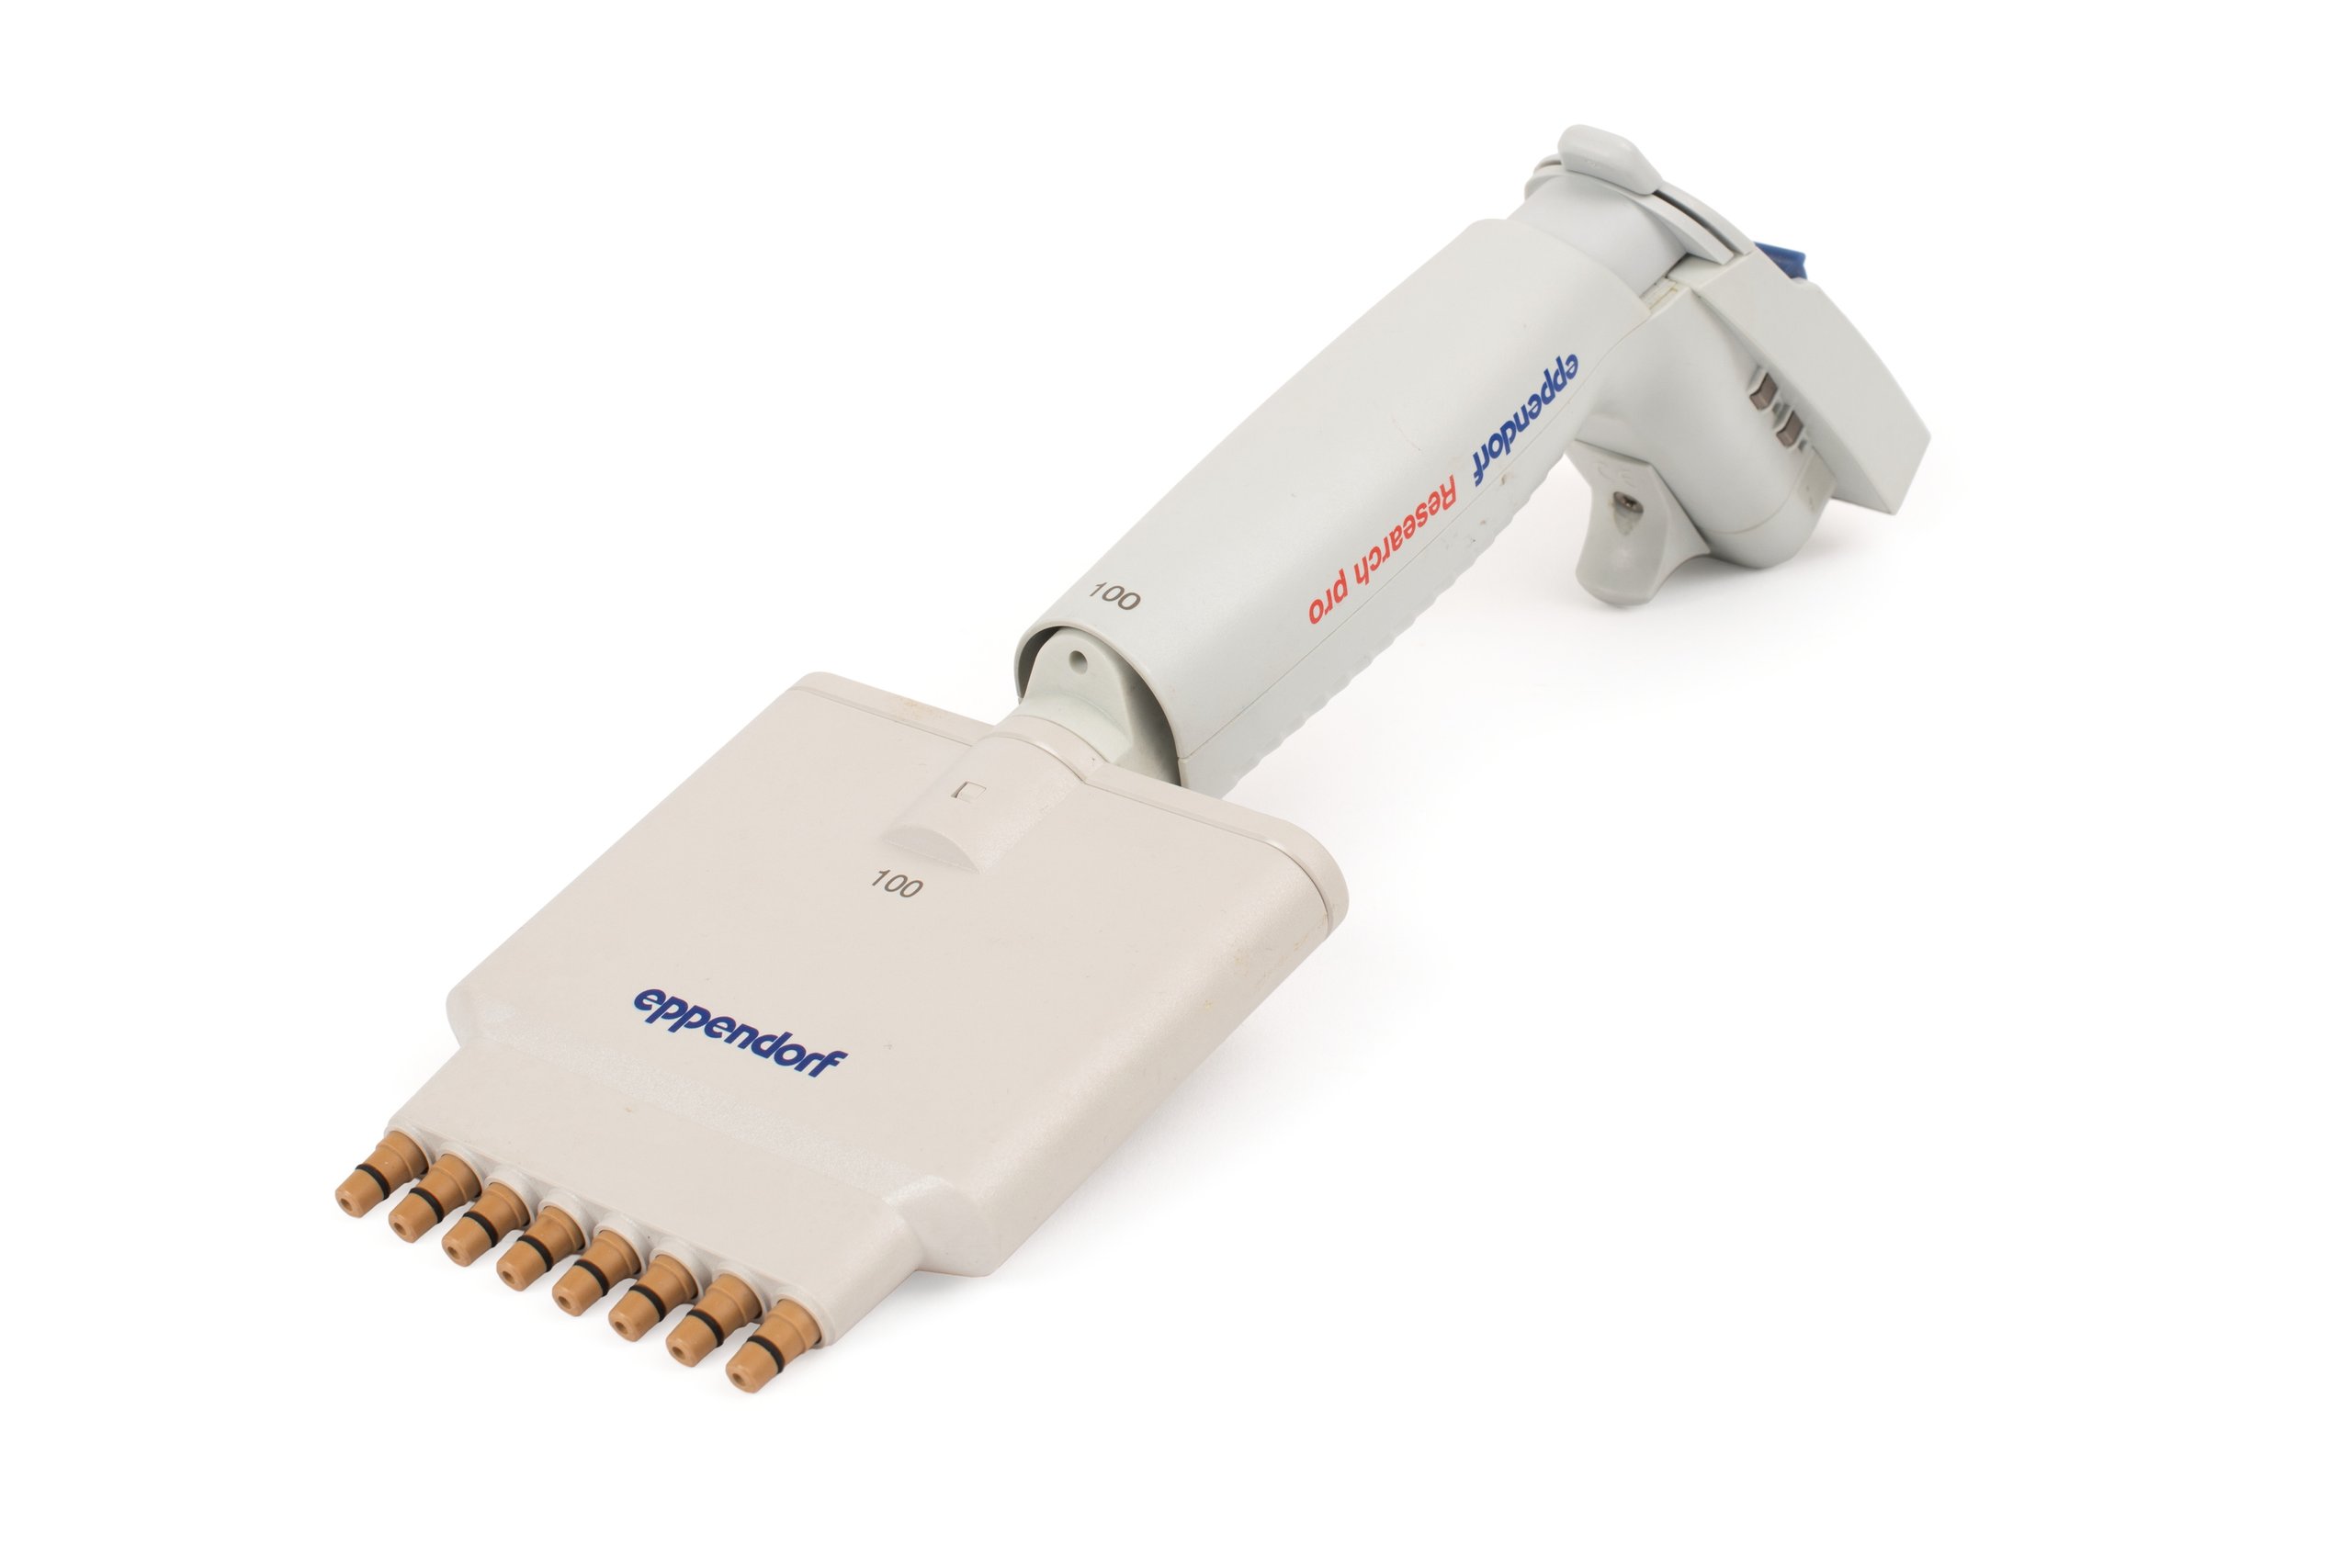 Eppendorf Research Pro Multi-Channel Pipette used by Westmead Medical Research Institute